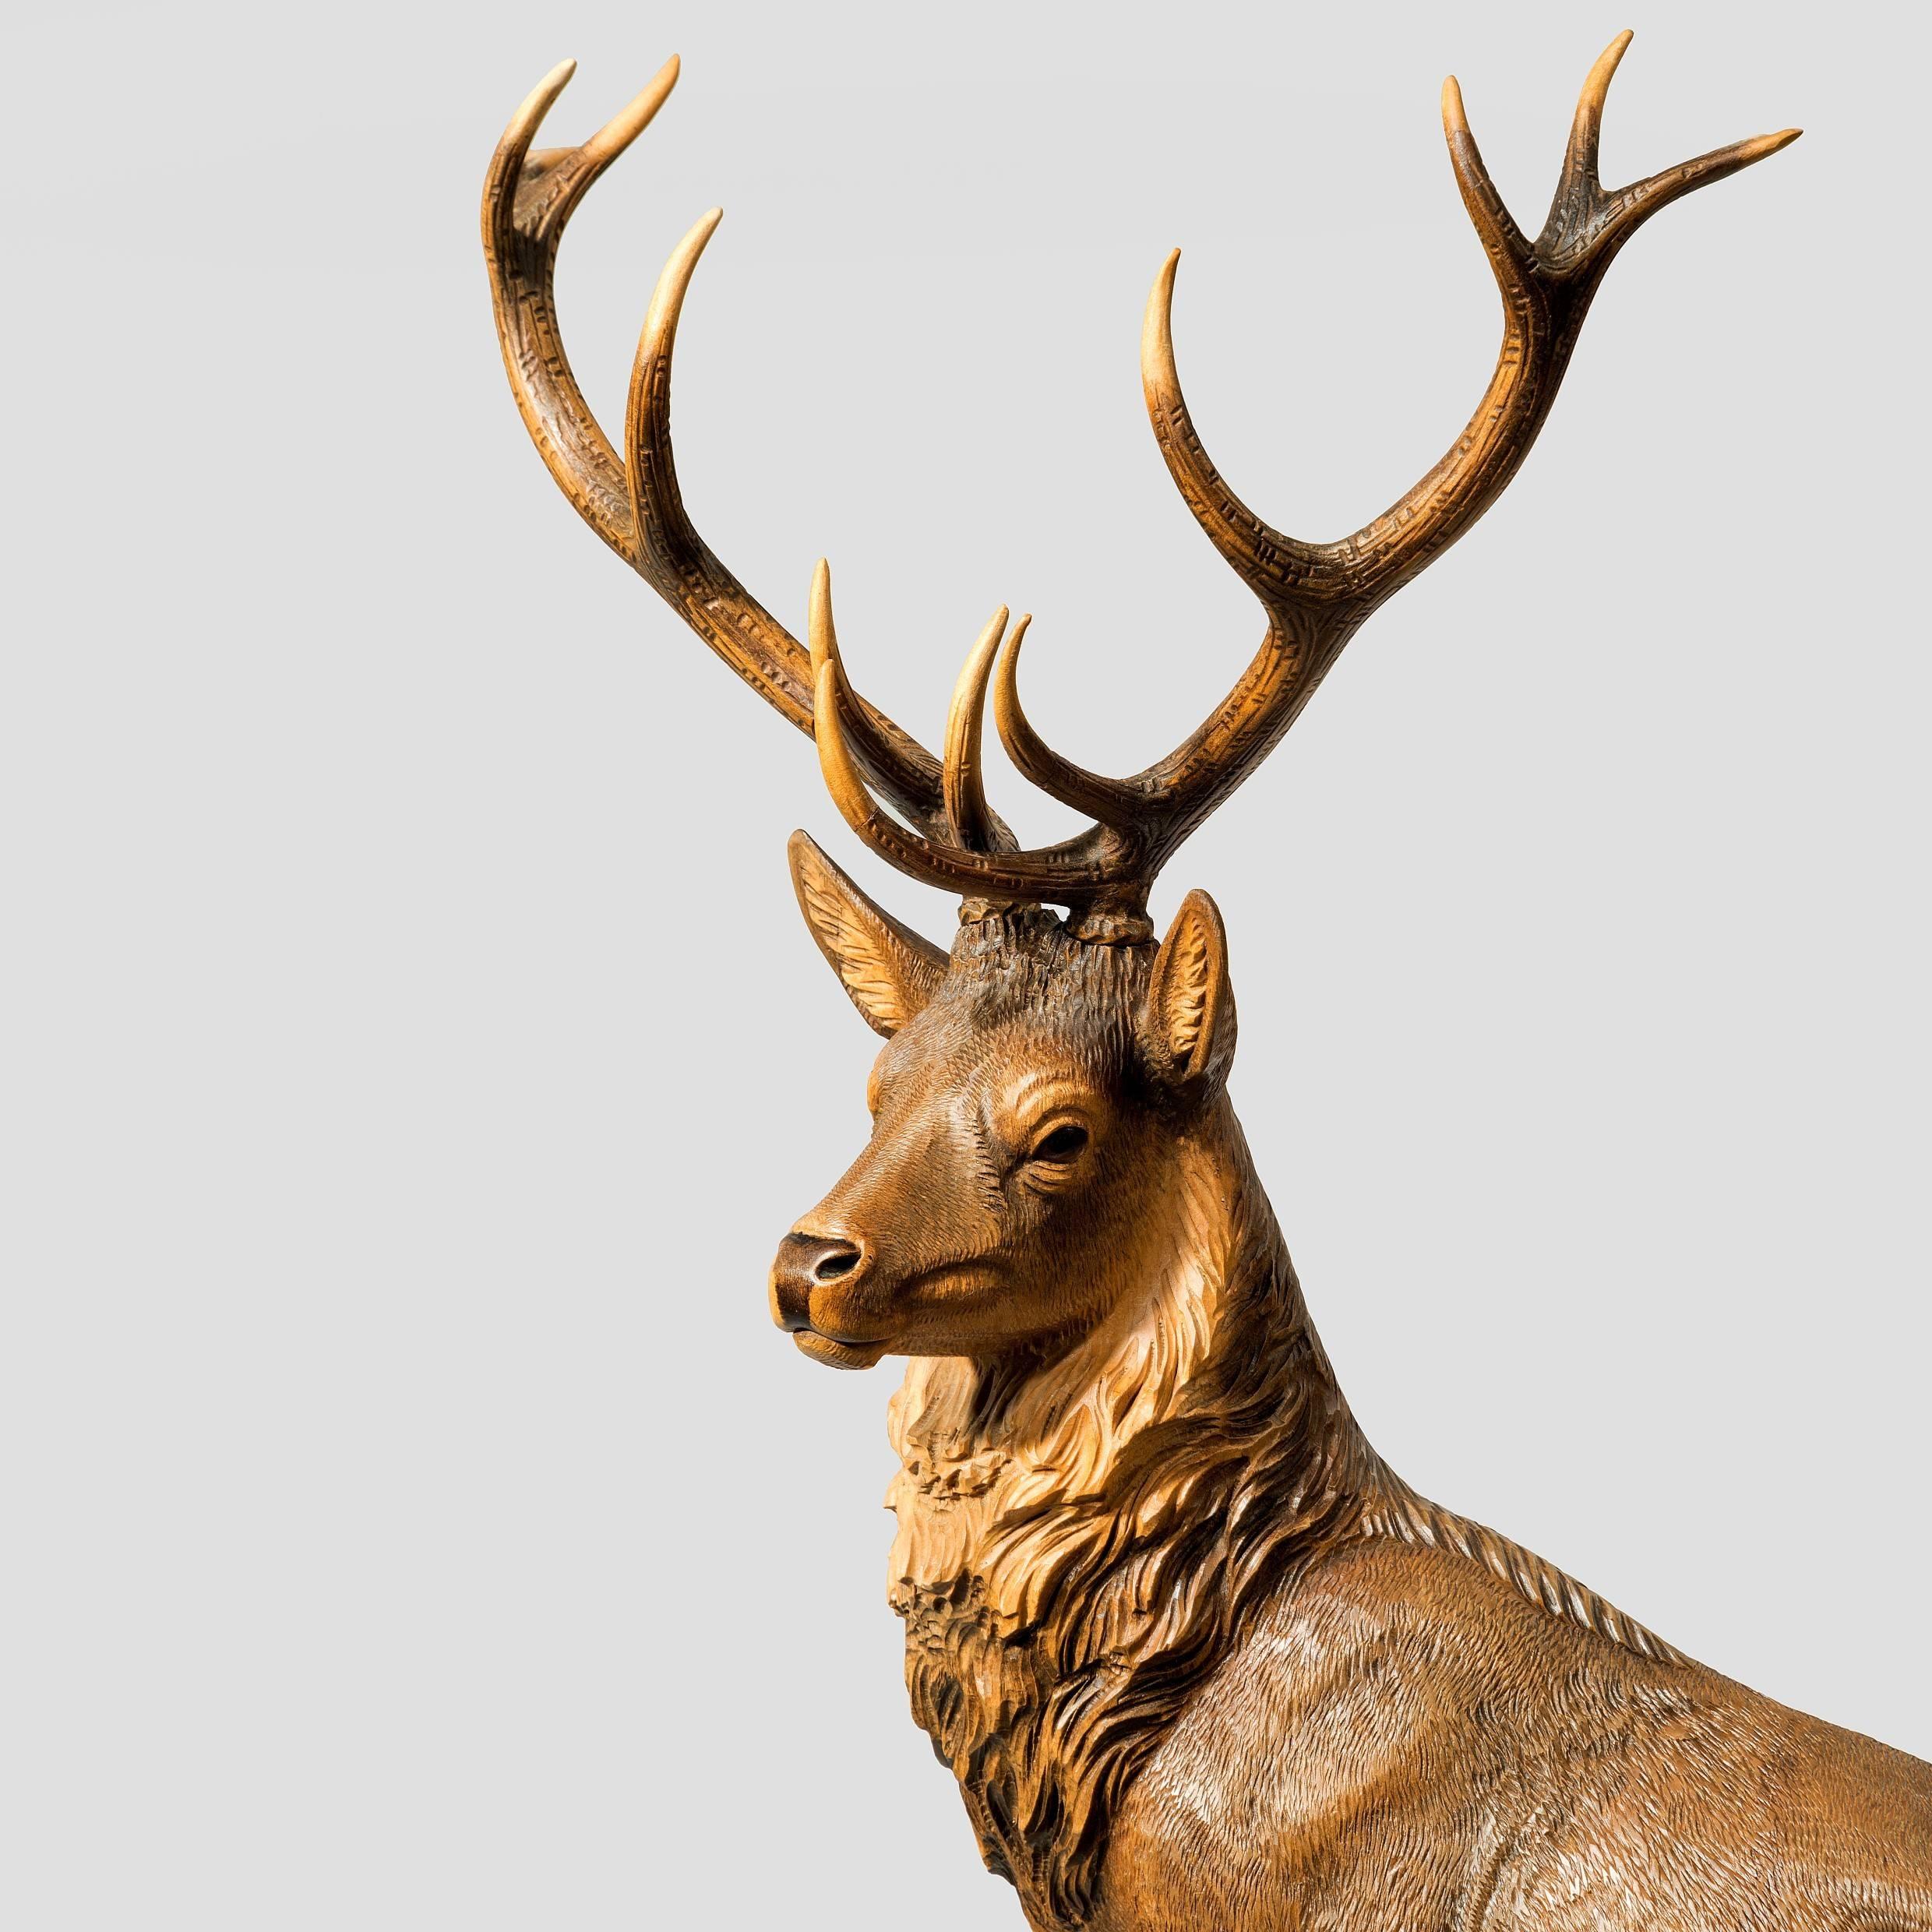 Standing proudly with his head turned to the left, the pelt naturalistically carved and stained round the neck and down the spine, the antlers stained lighter at the tips. Signed F R Michel.